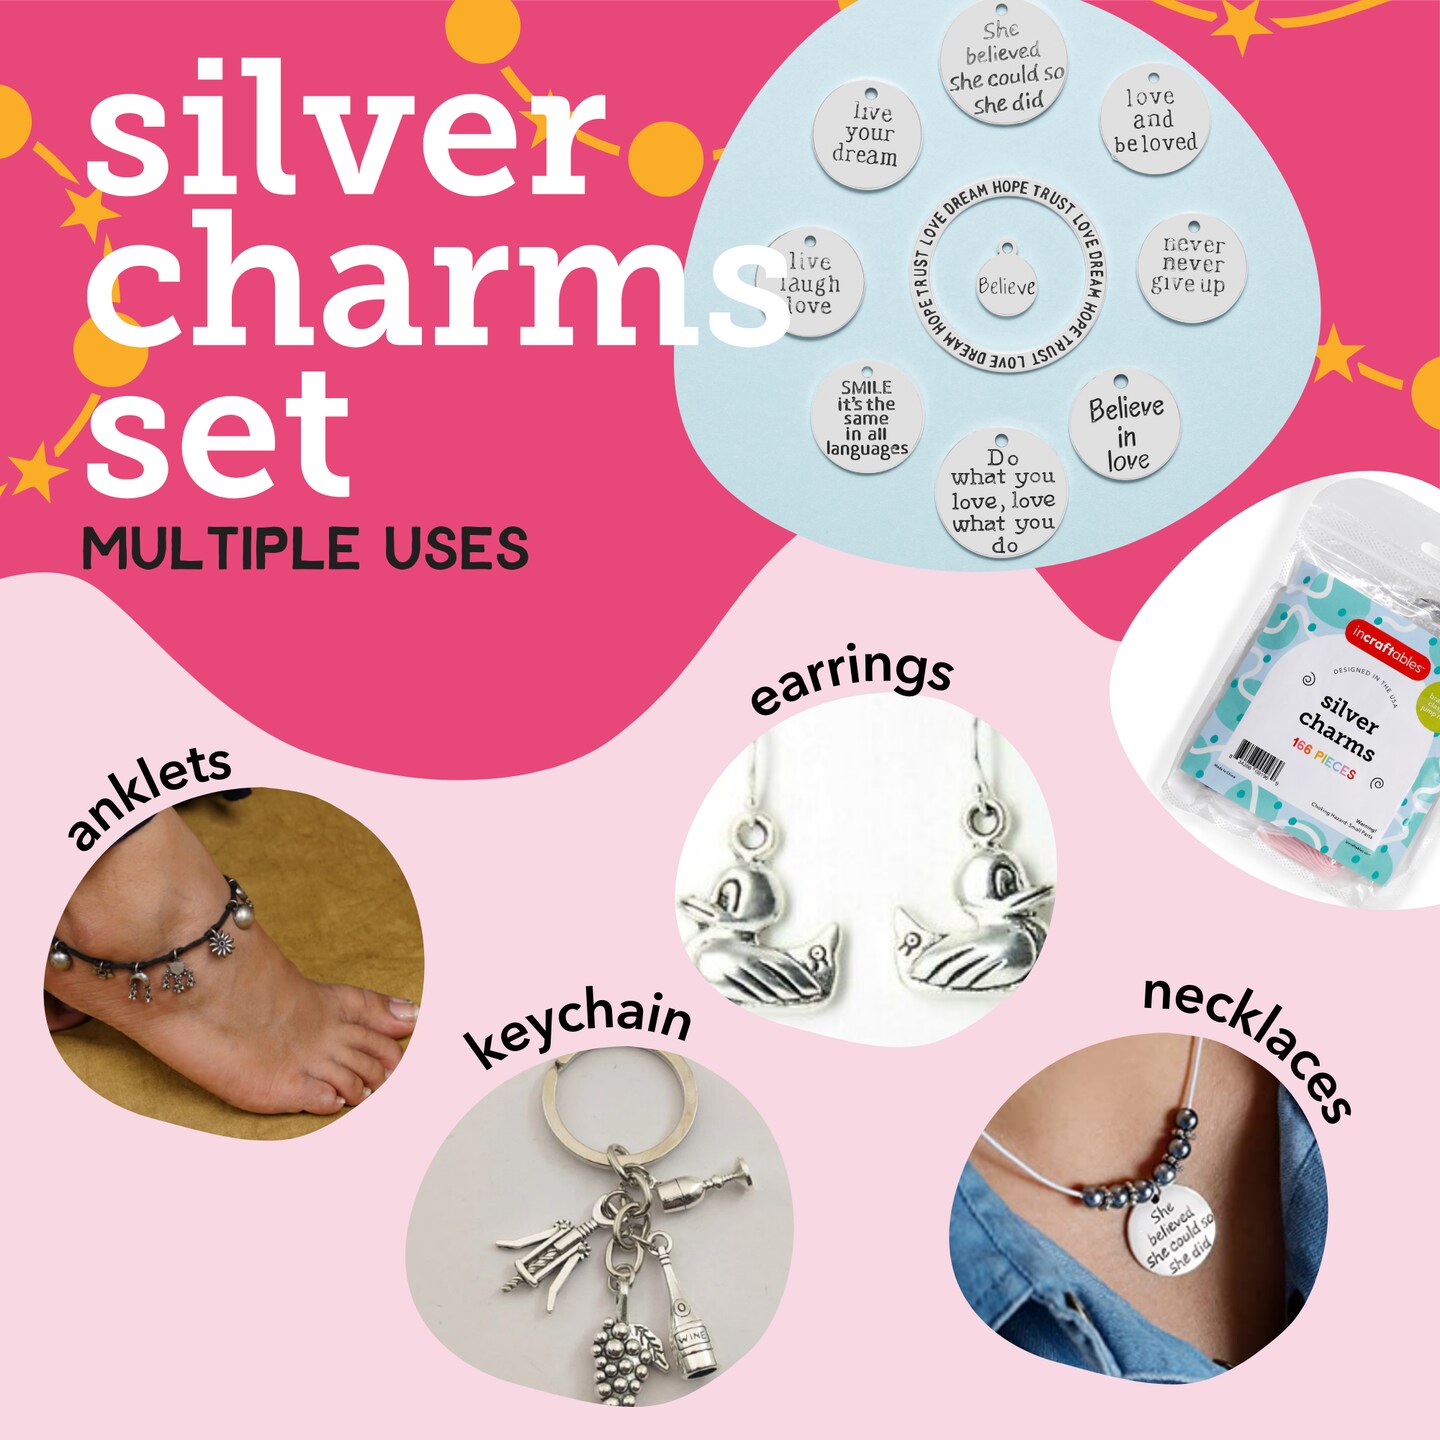 Incraftables 166pcs Silver Charms Set for Jewelry Making. Bulk DIY Necklace, Bracelet, Bangle &#x26; Keychain Making Kit w/ 120pcs Antique Charms (Small &#x26; Large), 20pcs Word Charms &#x26; 26pcs A-Z Letter Charm